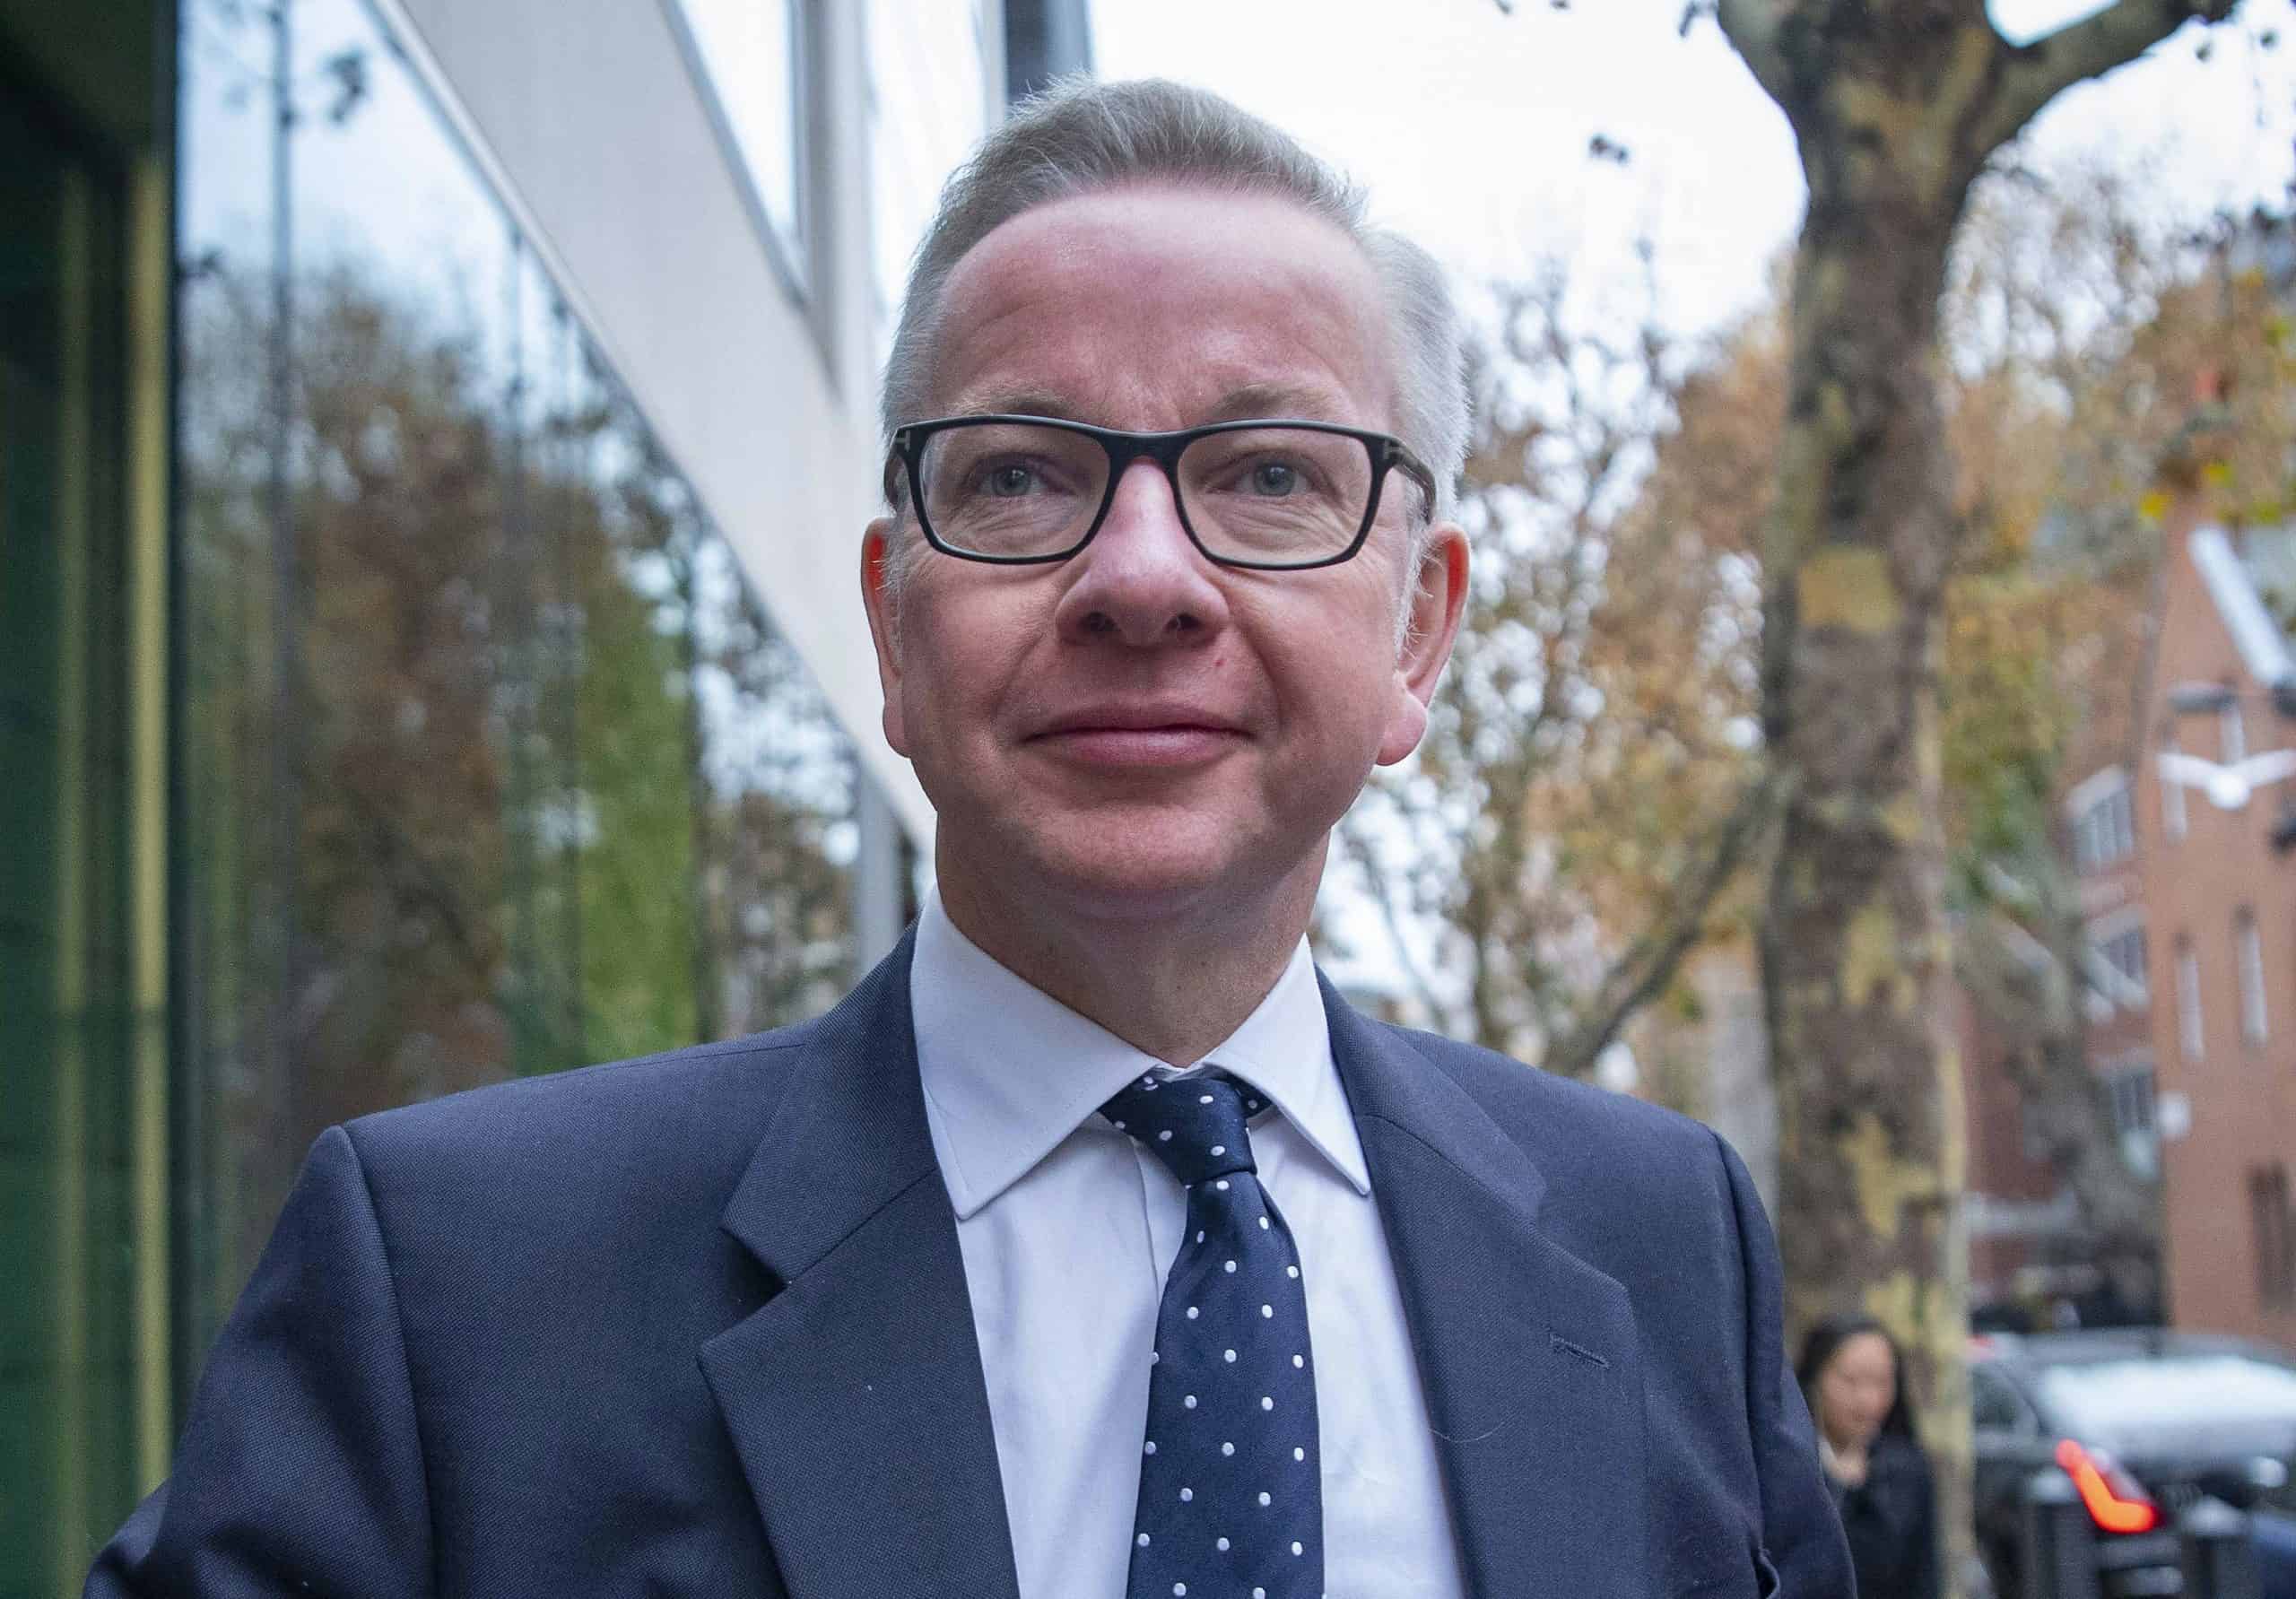 ‘Less than 50% chance’ of a Brexit deal being struck, Gove says